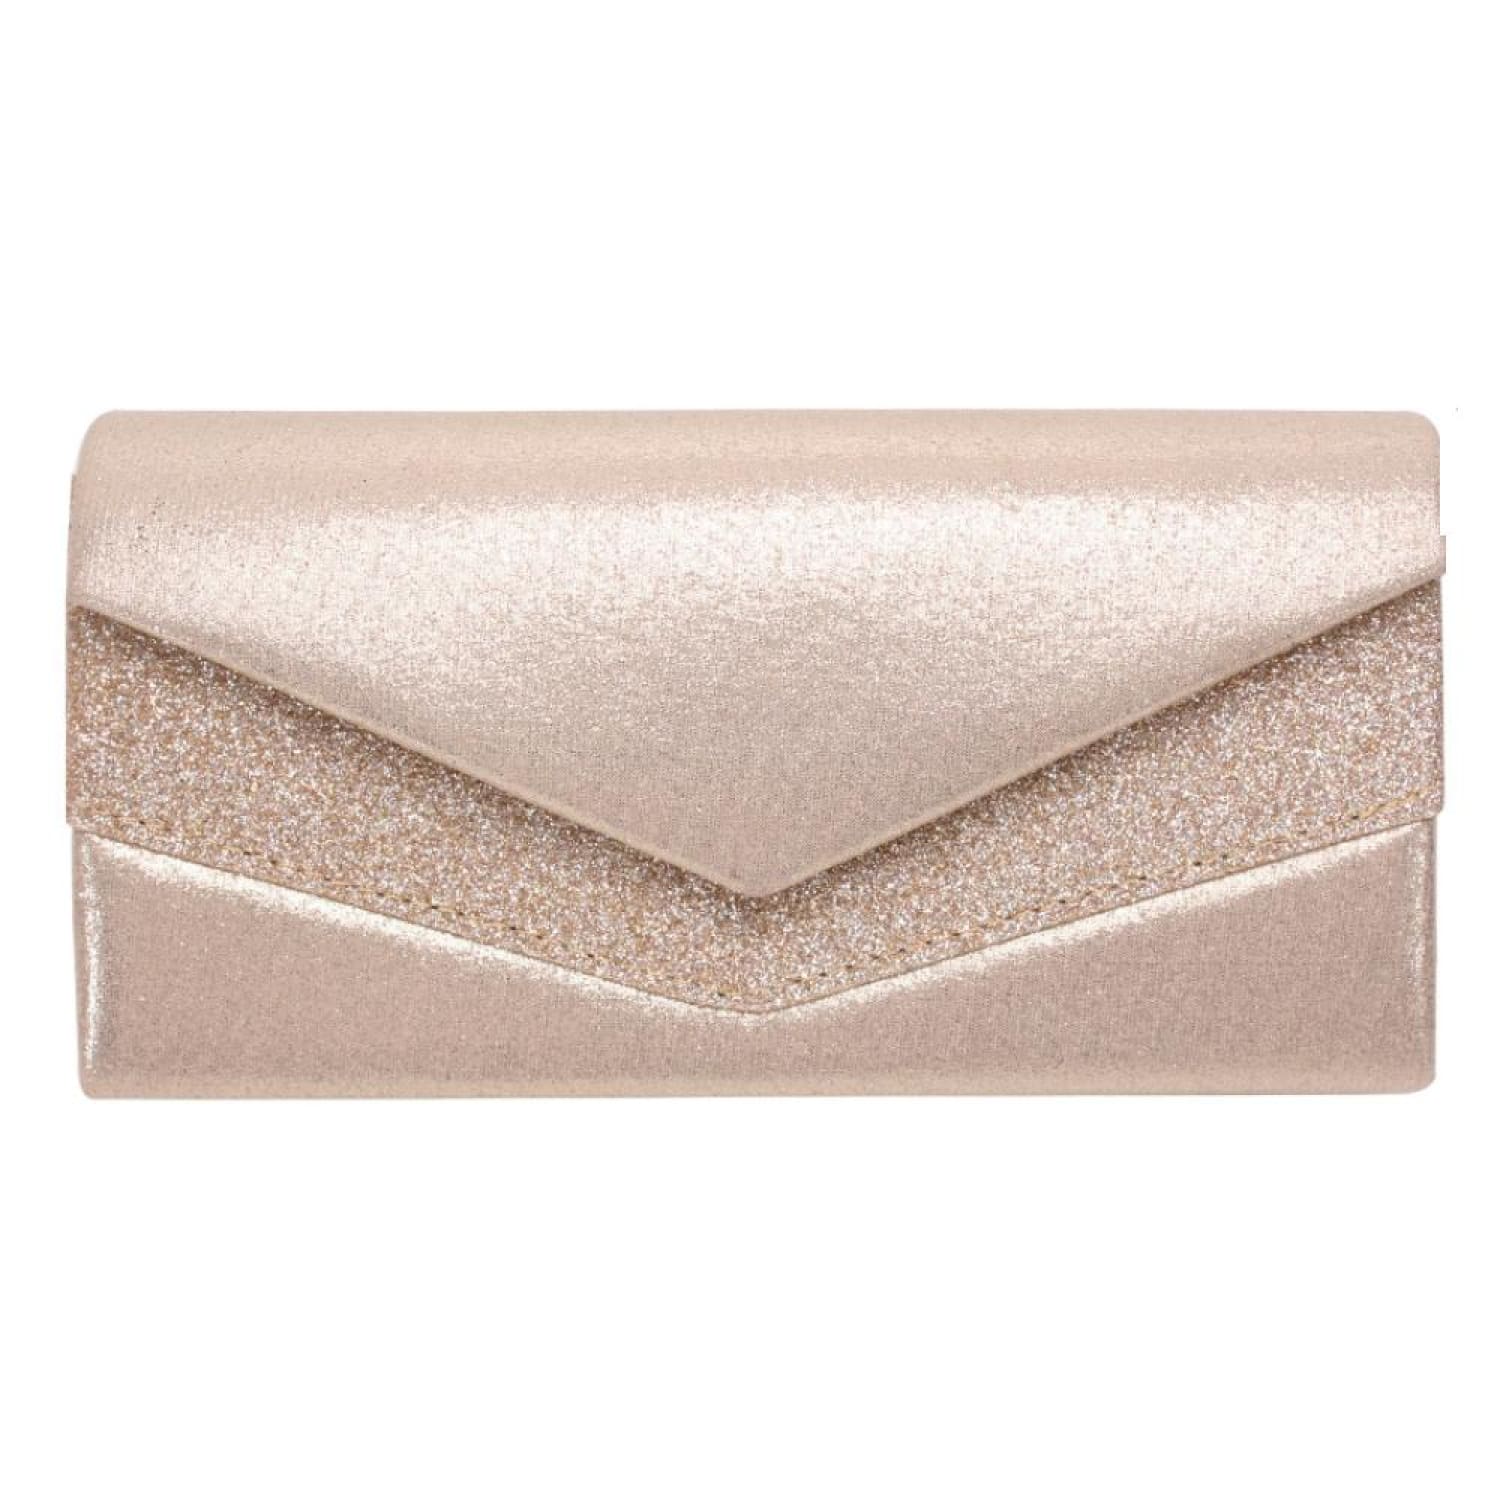 SIVI Glitter Clutch Purses for Women Evening Bags and Cluthes with Twist  Lock,Bride Purse for Wedding Clutch Handbag for Party(C107,Golden) :  Amazon.in: Fashion